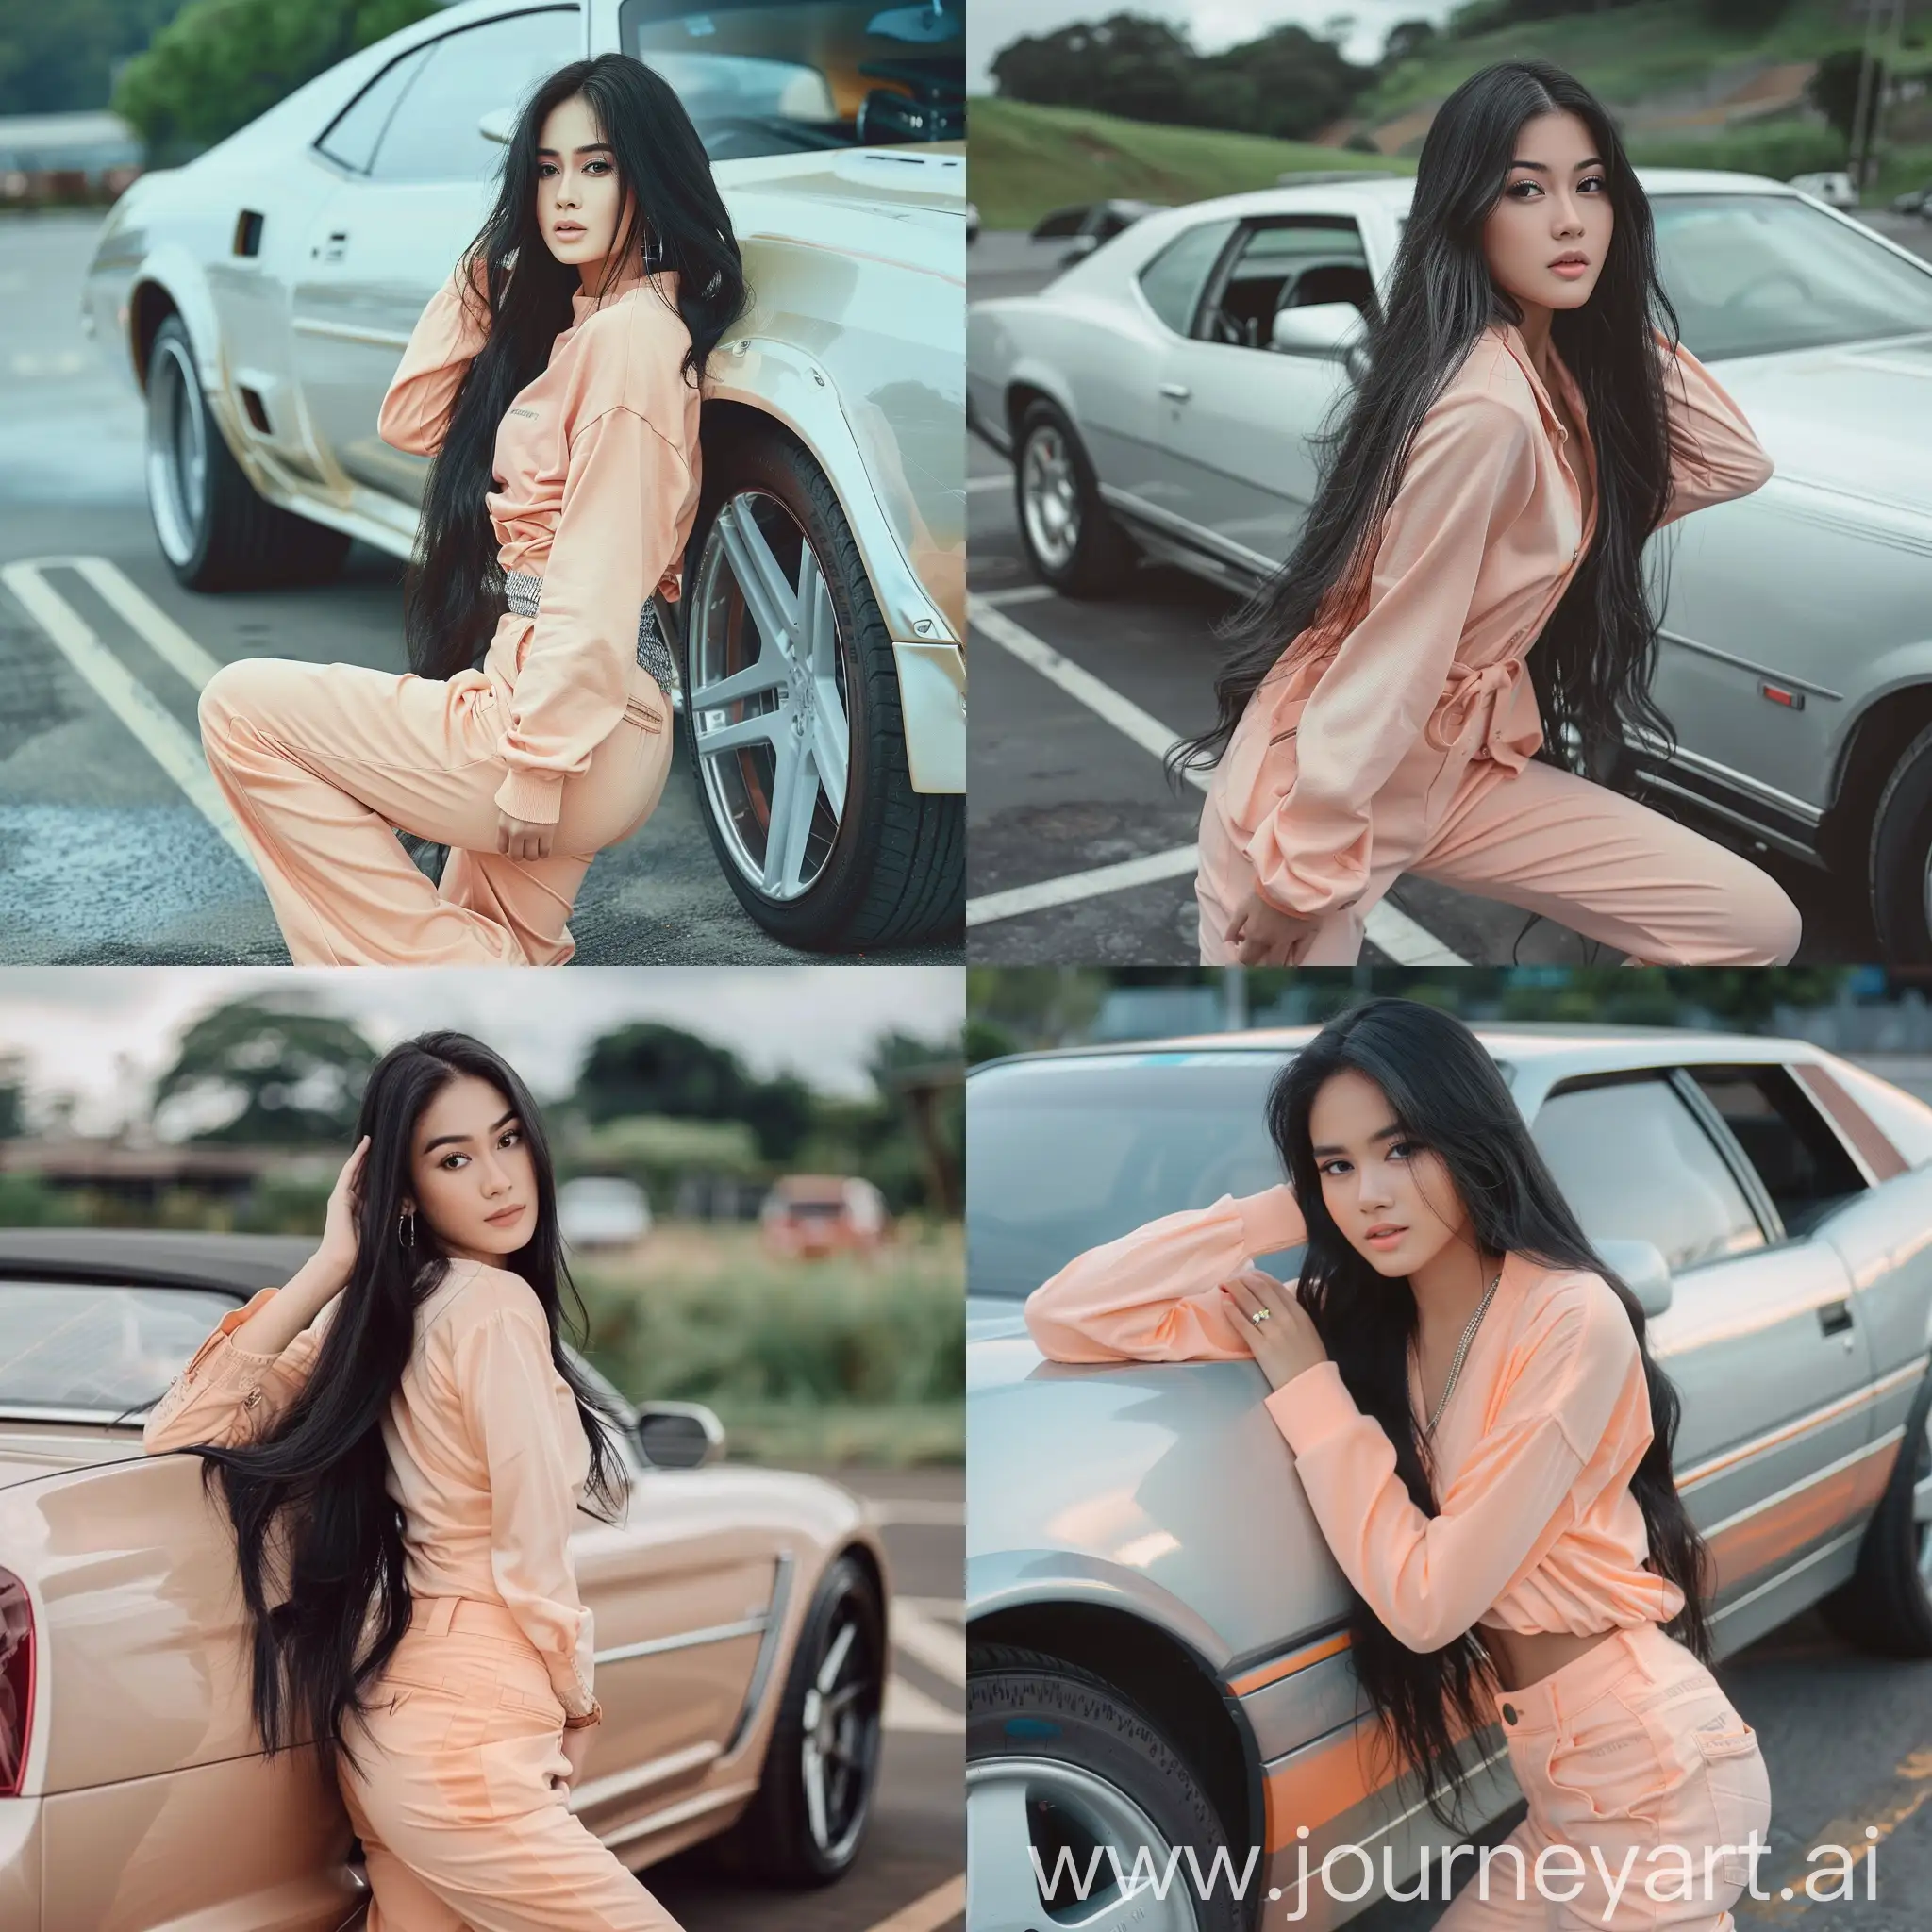 a 23 years old Indonesian girl, long black hair, peach-colored casual clothes, leaning to a an expensive car, elegant pose, on a parking lot